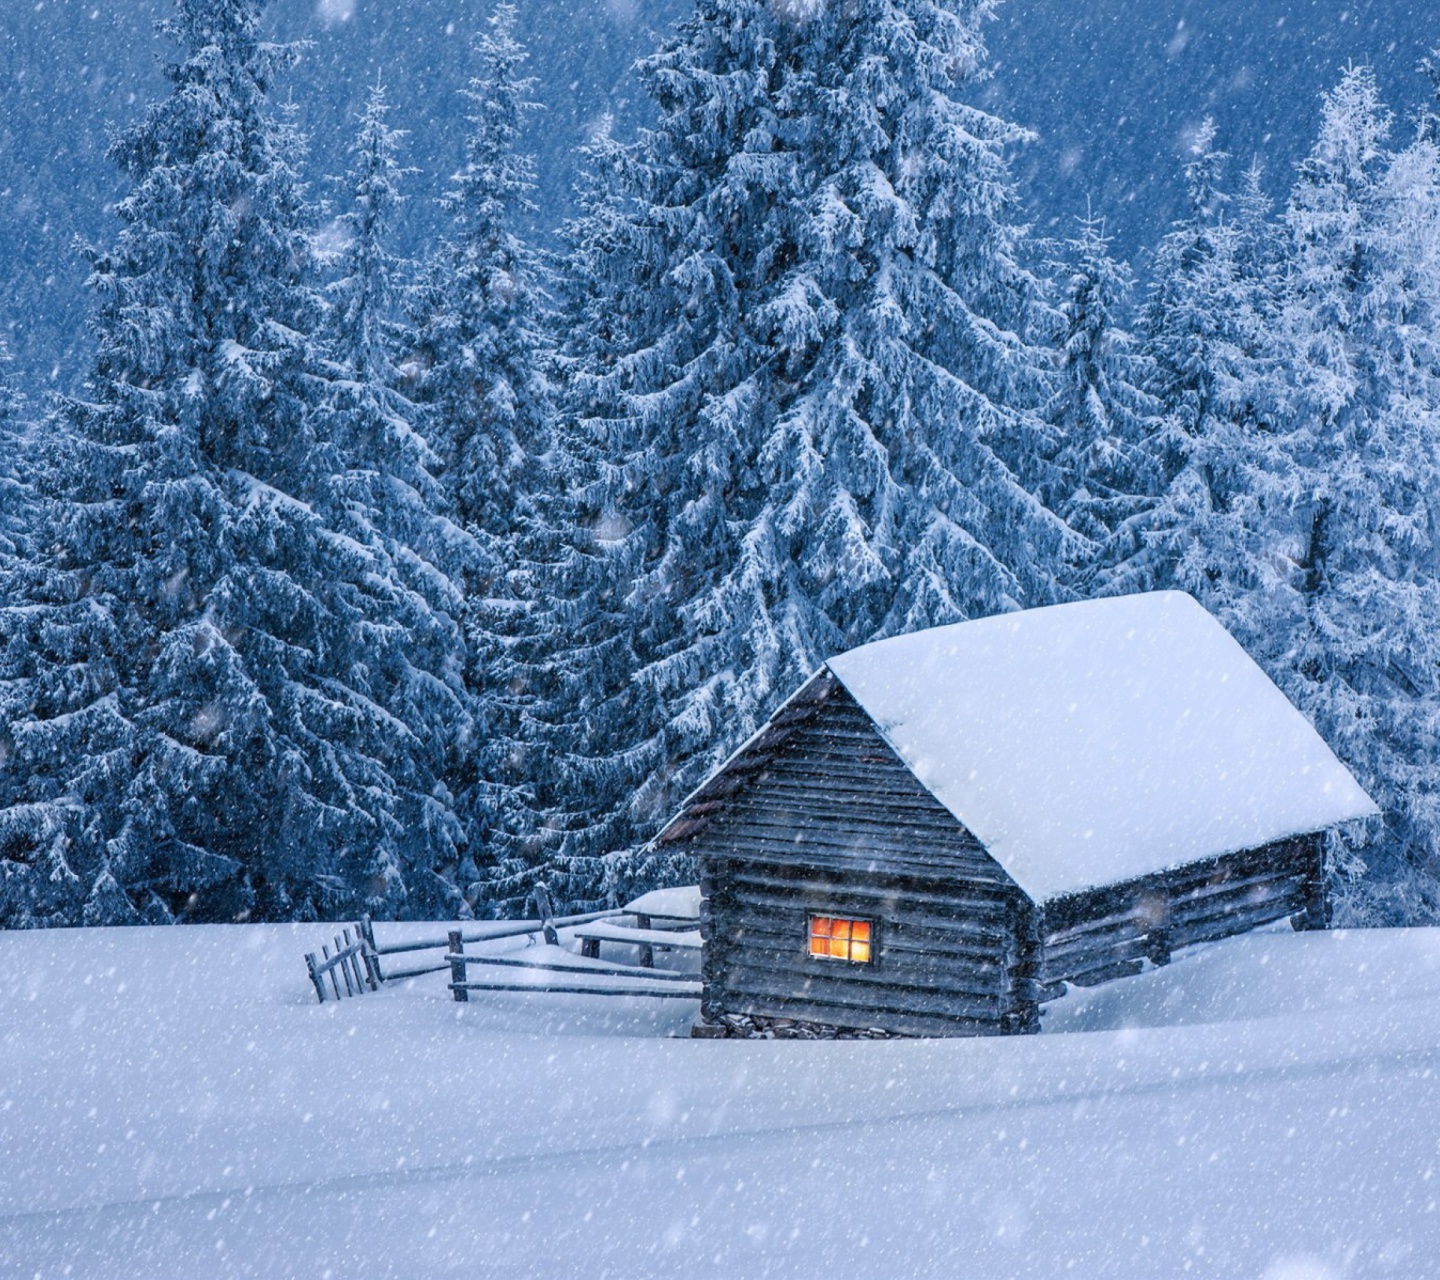 House in winter forest wallpaper 1440x1280